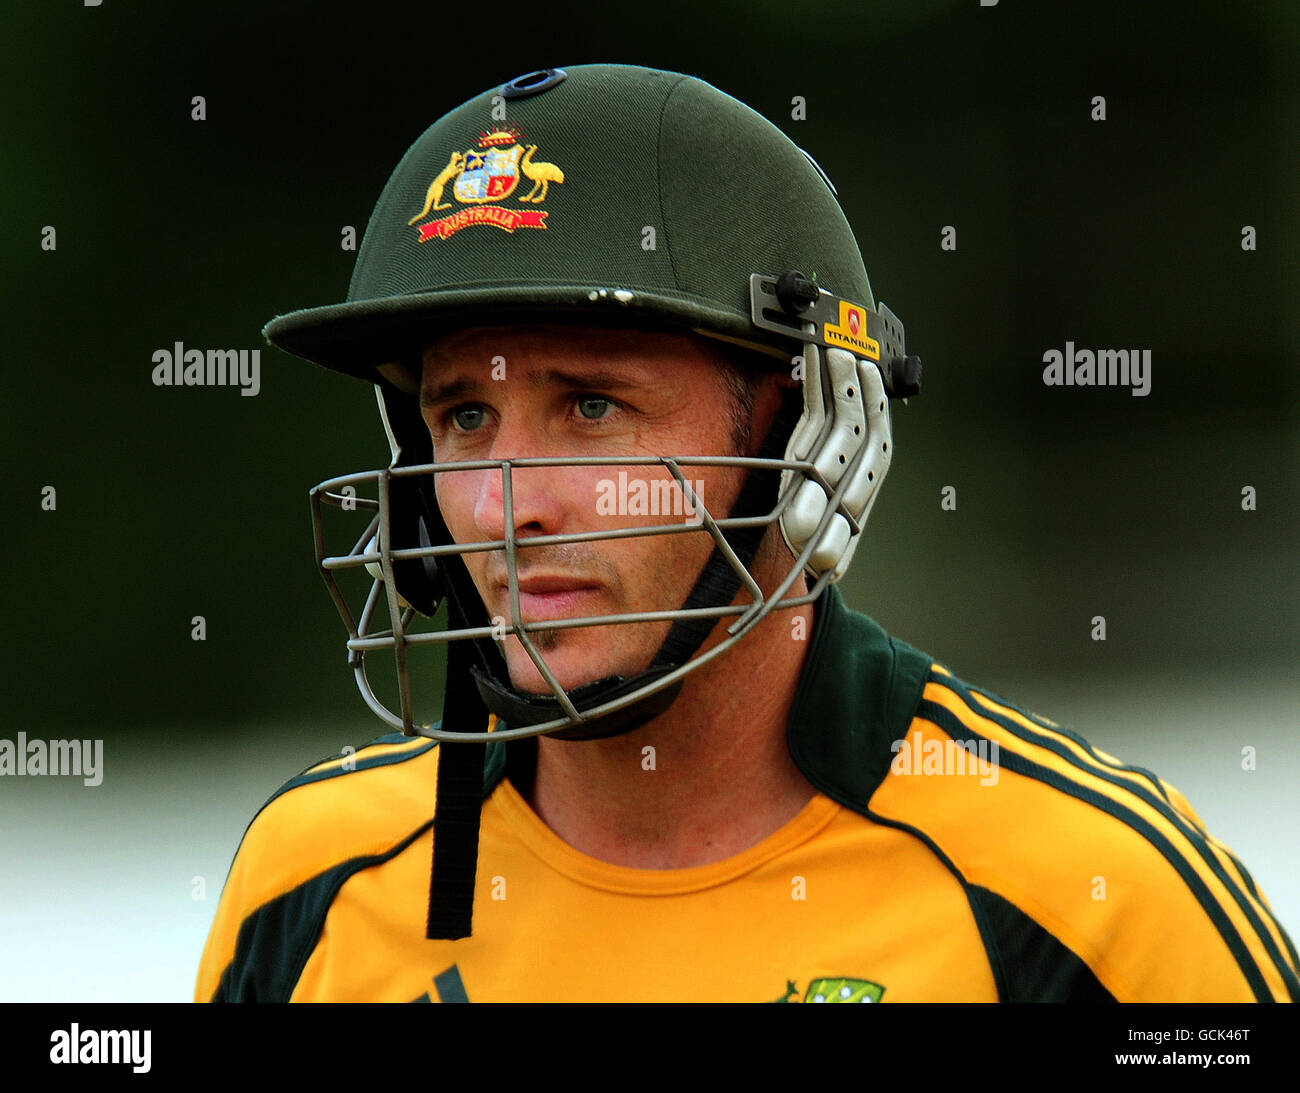 Australia's Michael Hussey during the First Twenty20 International match at Edgbaston, Birmingham. Picture date: Monday, July 5, 2010. See PA story CRICKET Australia. Photo credit should read: Rui Vieira/PA Wire. Stock Photo